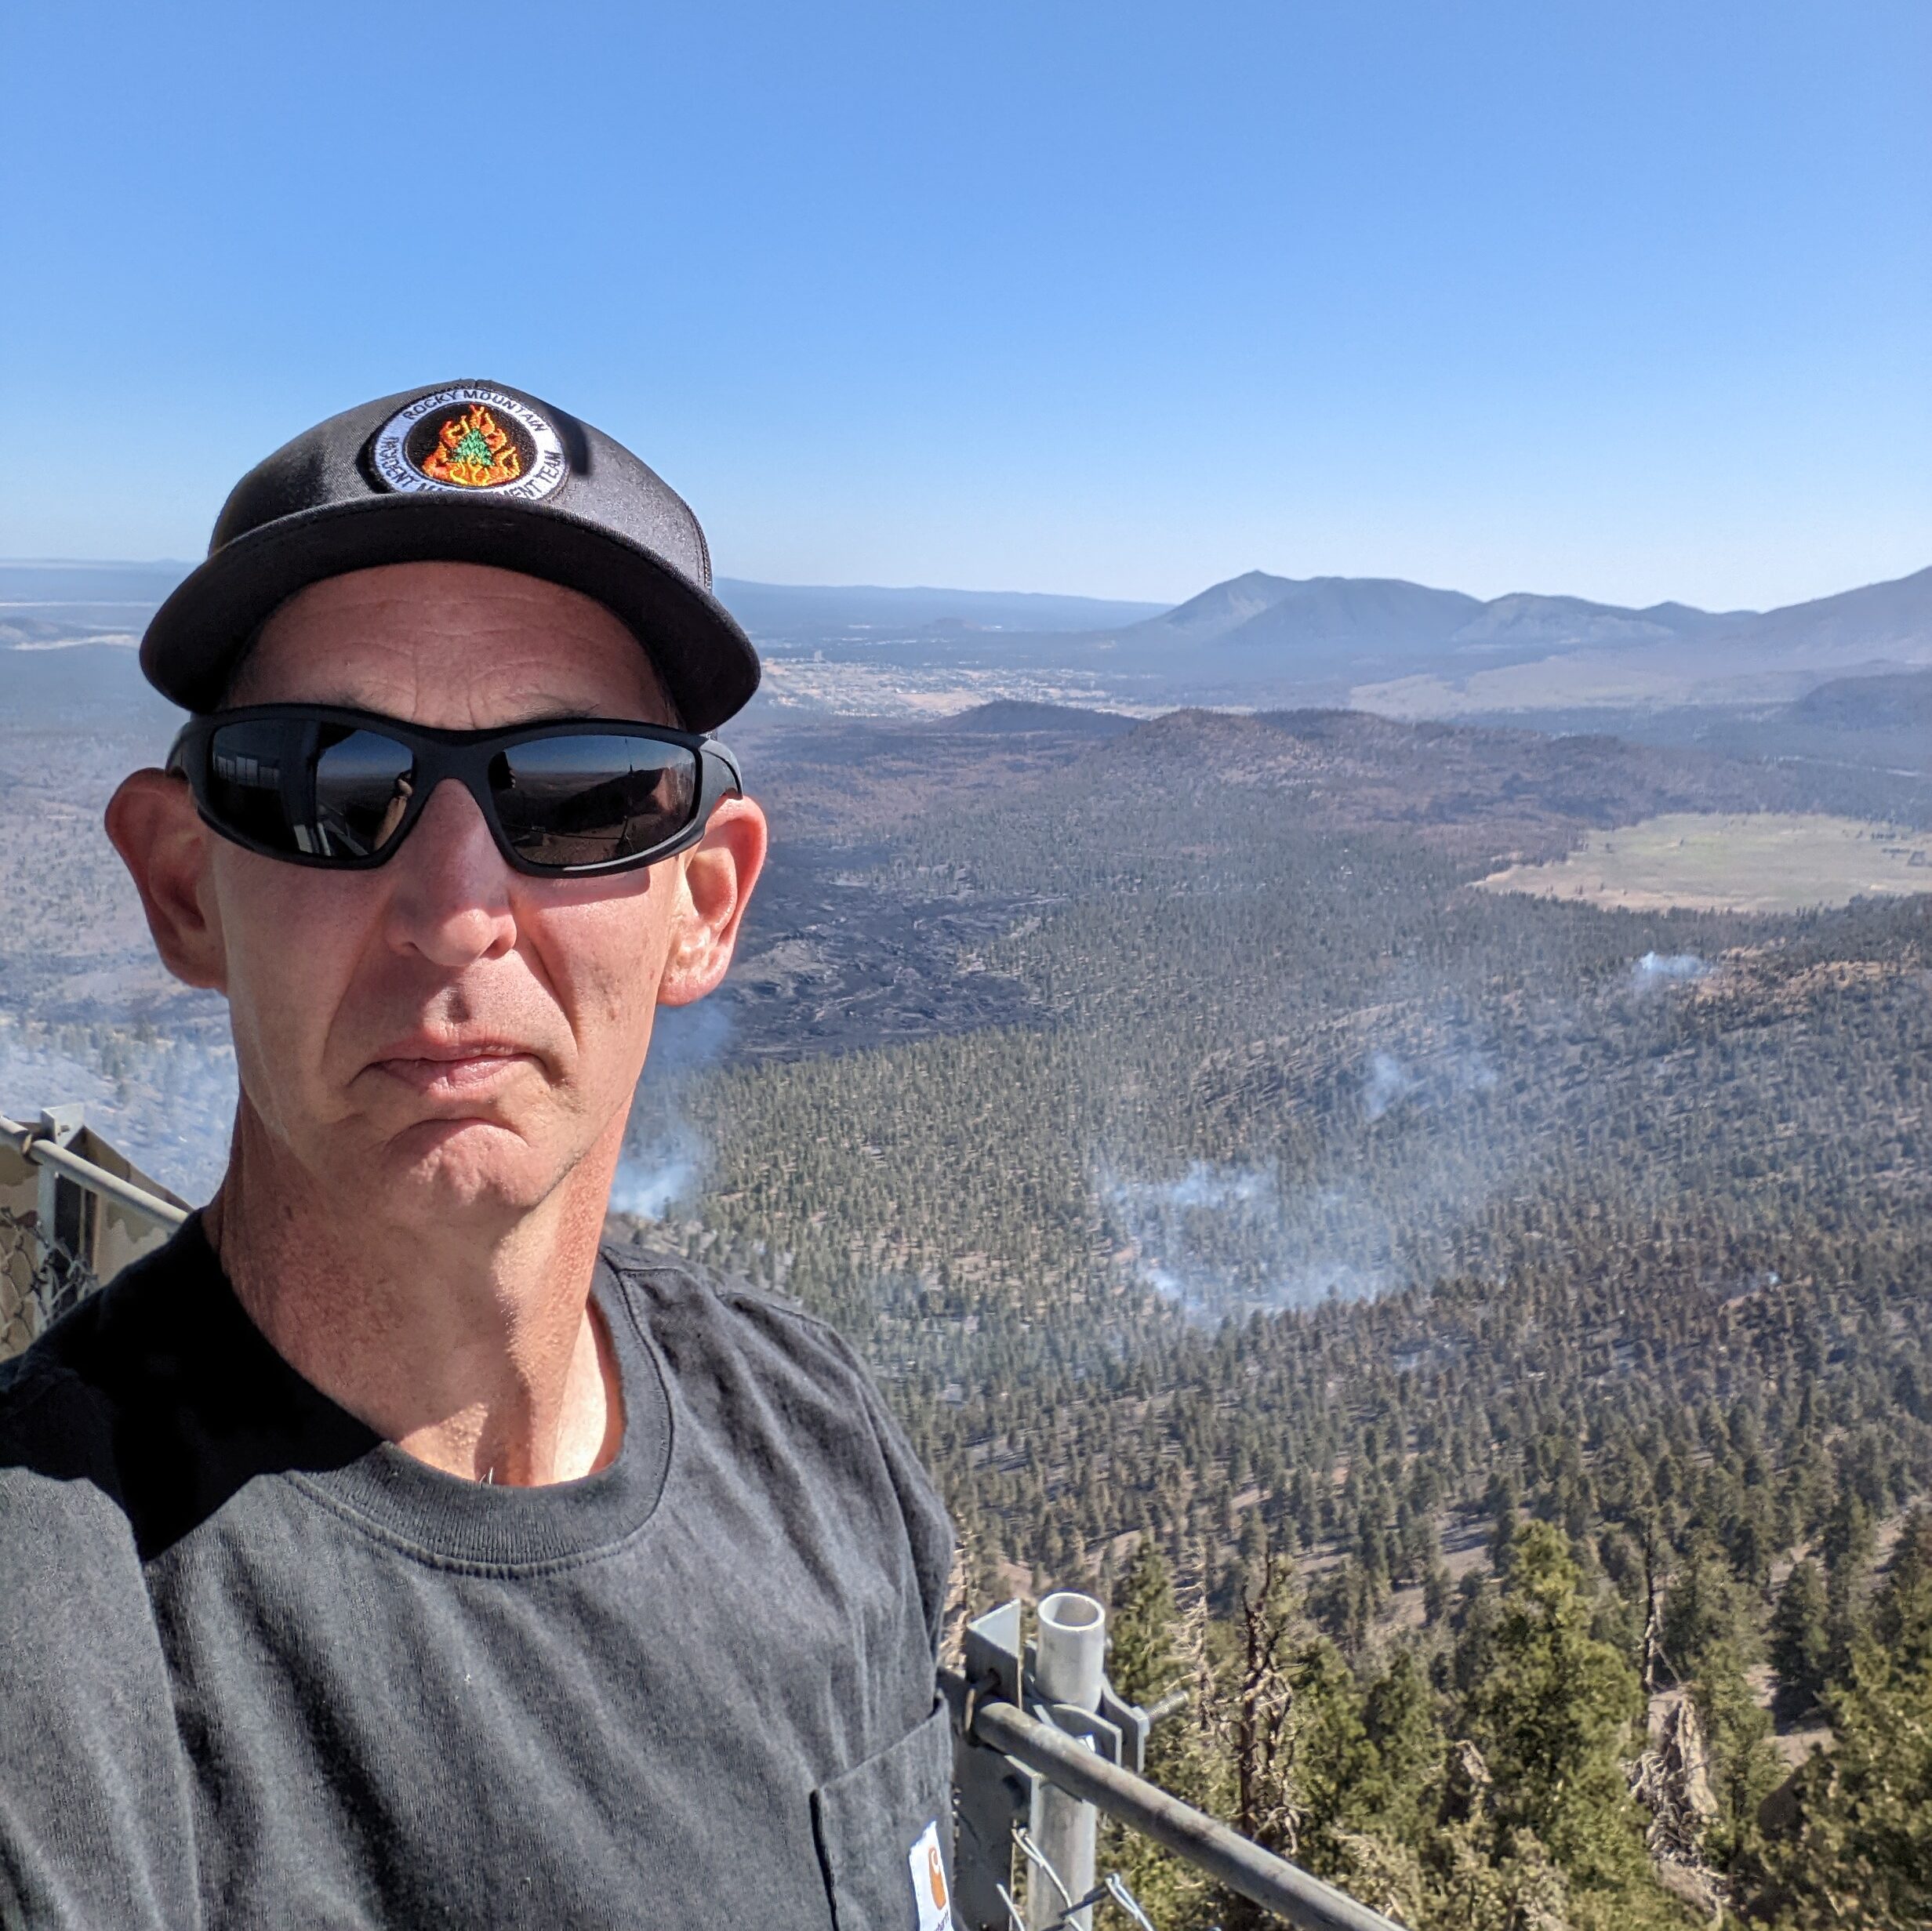 Bud standing on a fire tower in Arizona with the Pipeline fire smodlering in teh background.